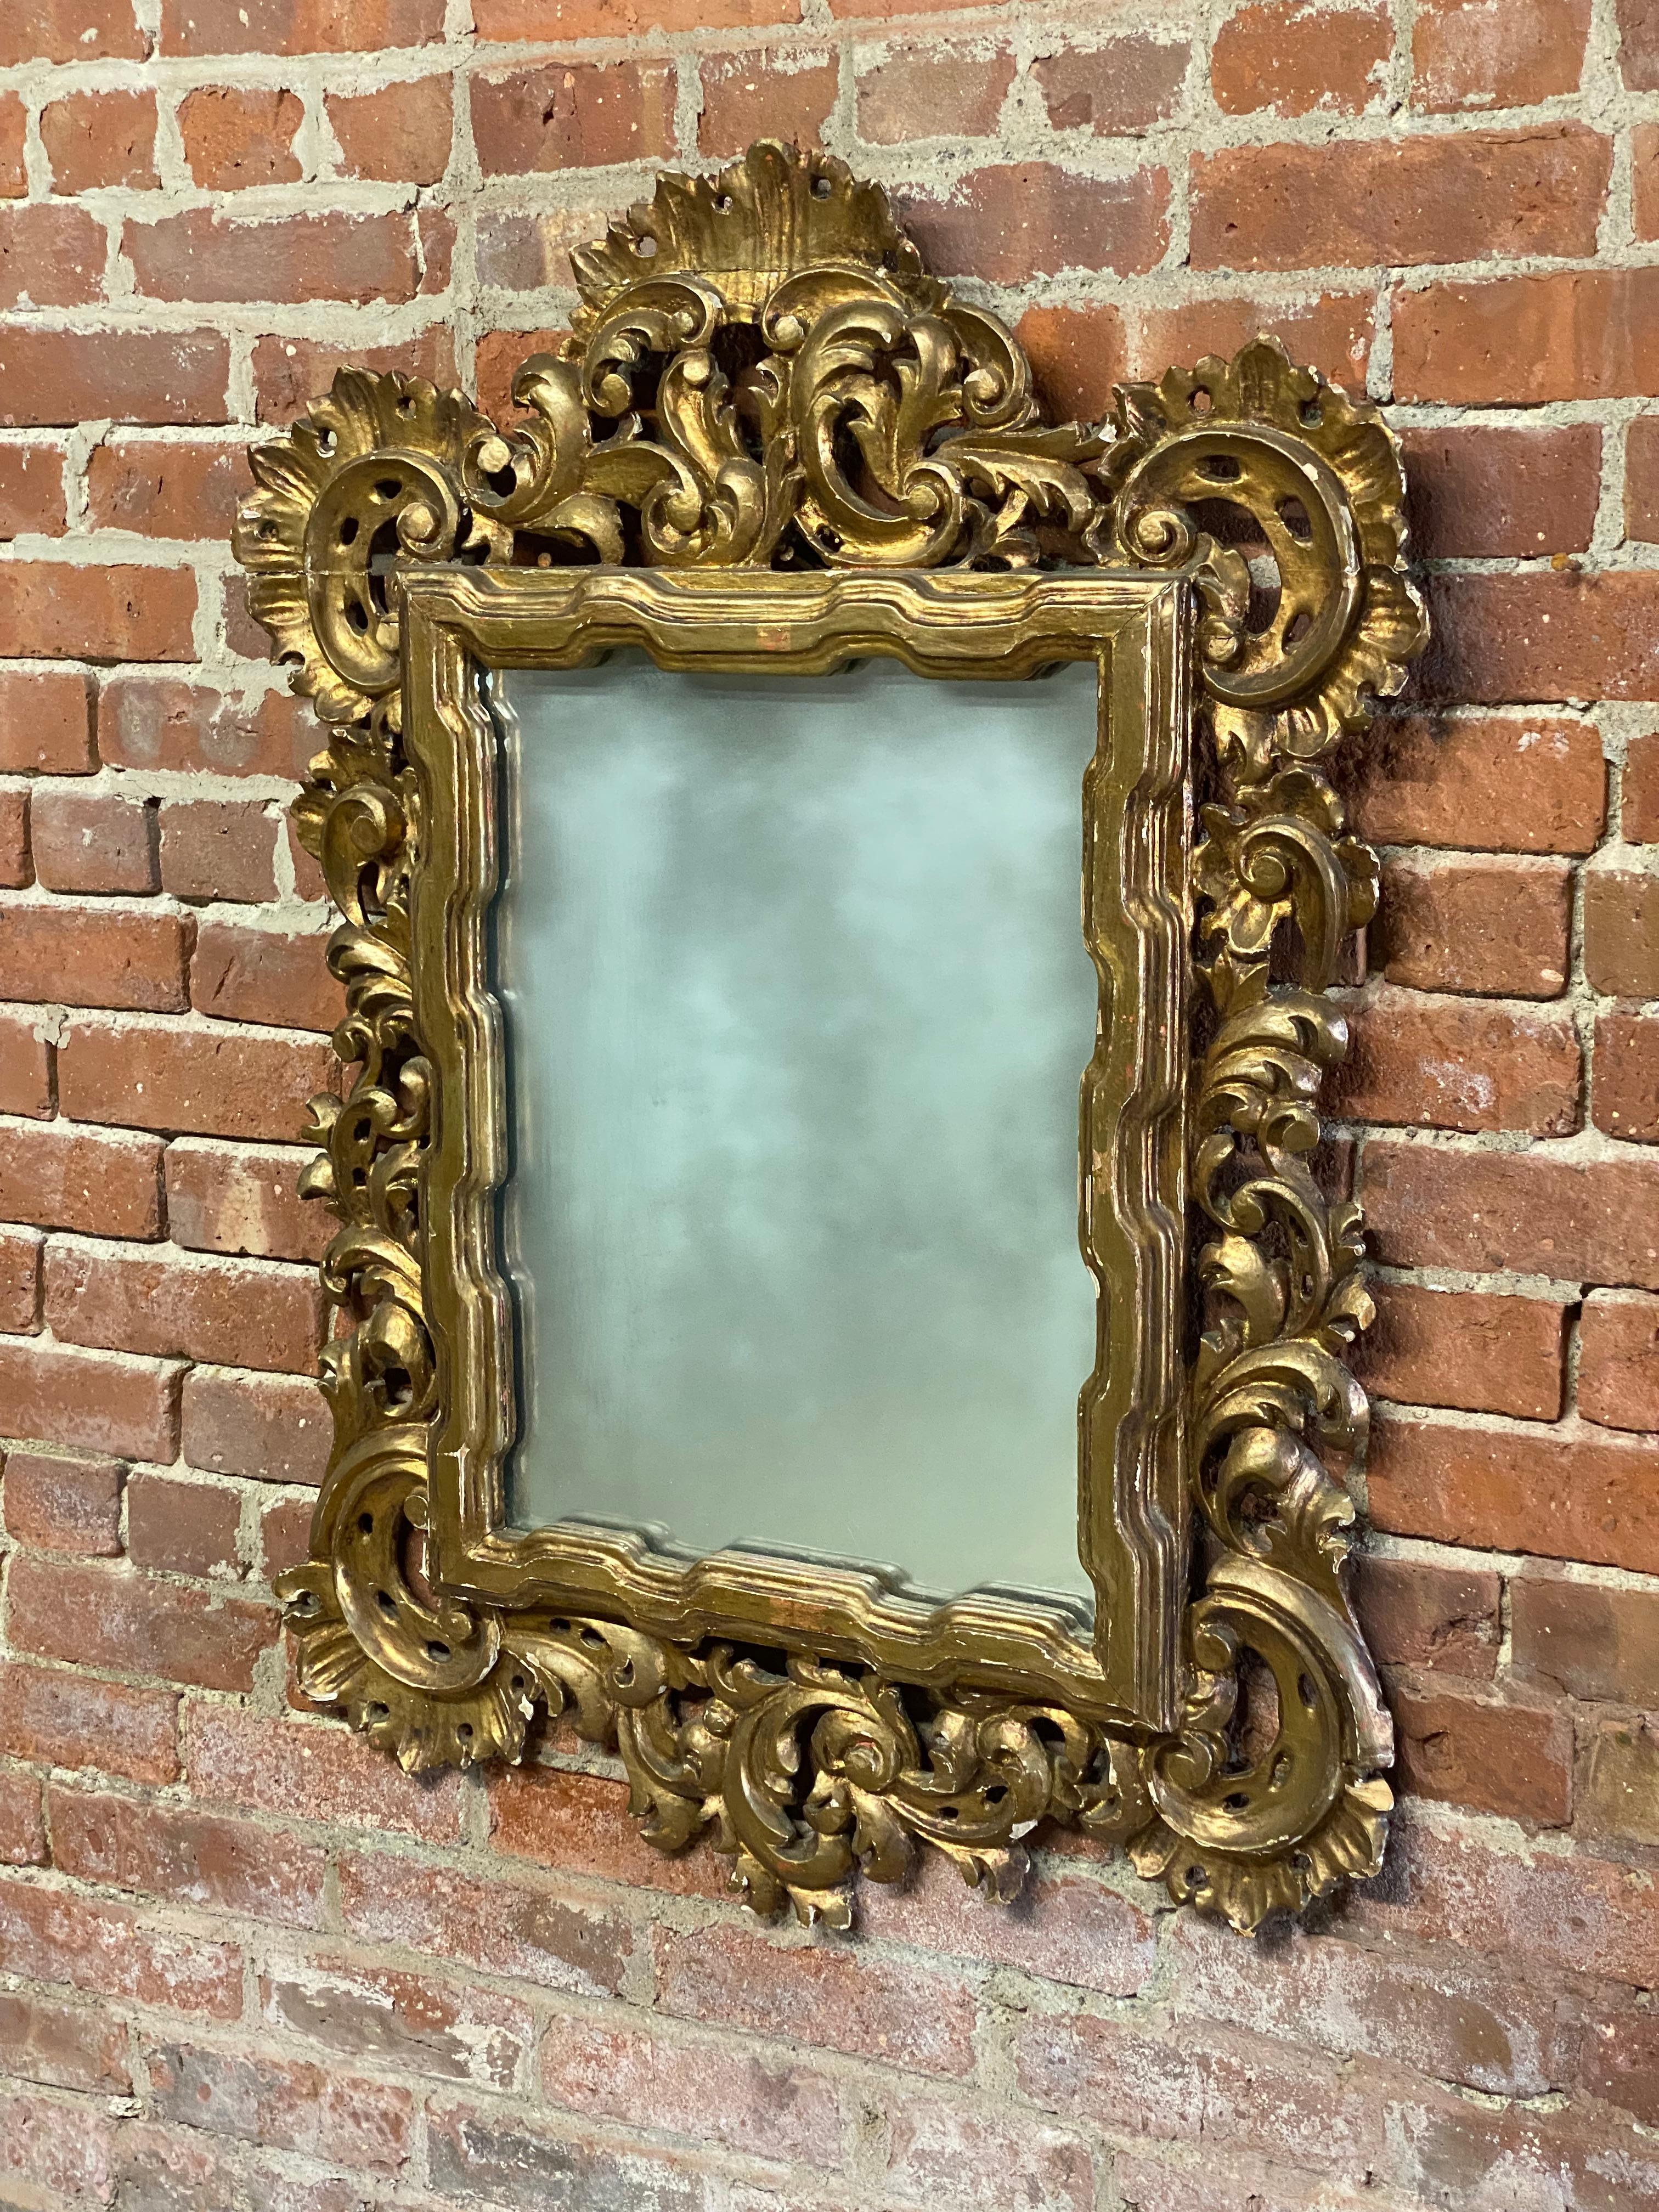 Italian Baroque style carved wood and gilded wall mirror. Sumptuously carved leaf and scrolled motif. The gilded wood shows hints of the typically Italian red bole and gesso under layers. Bole is the 